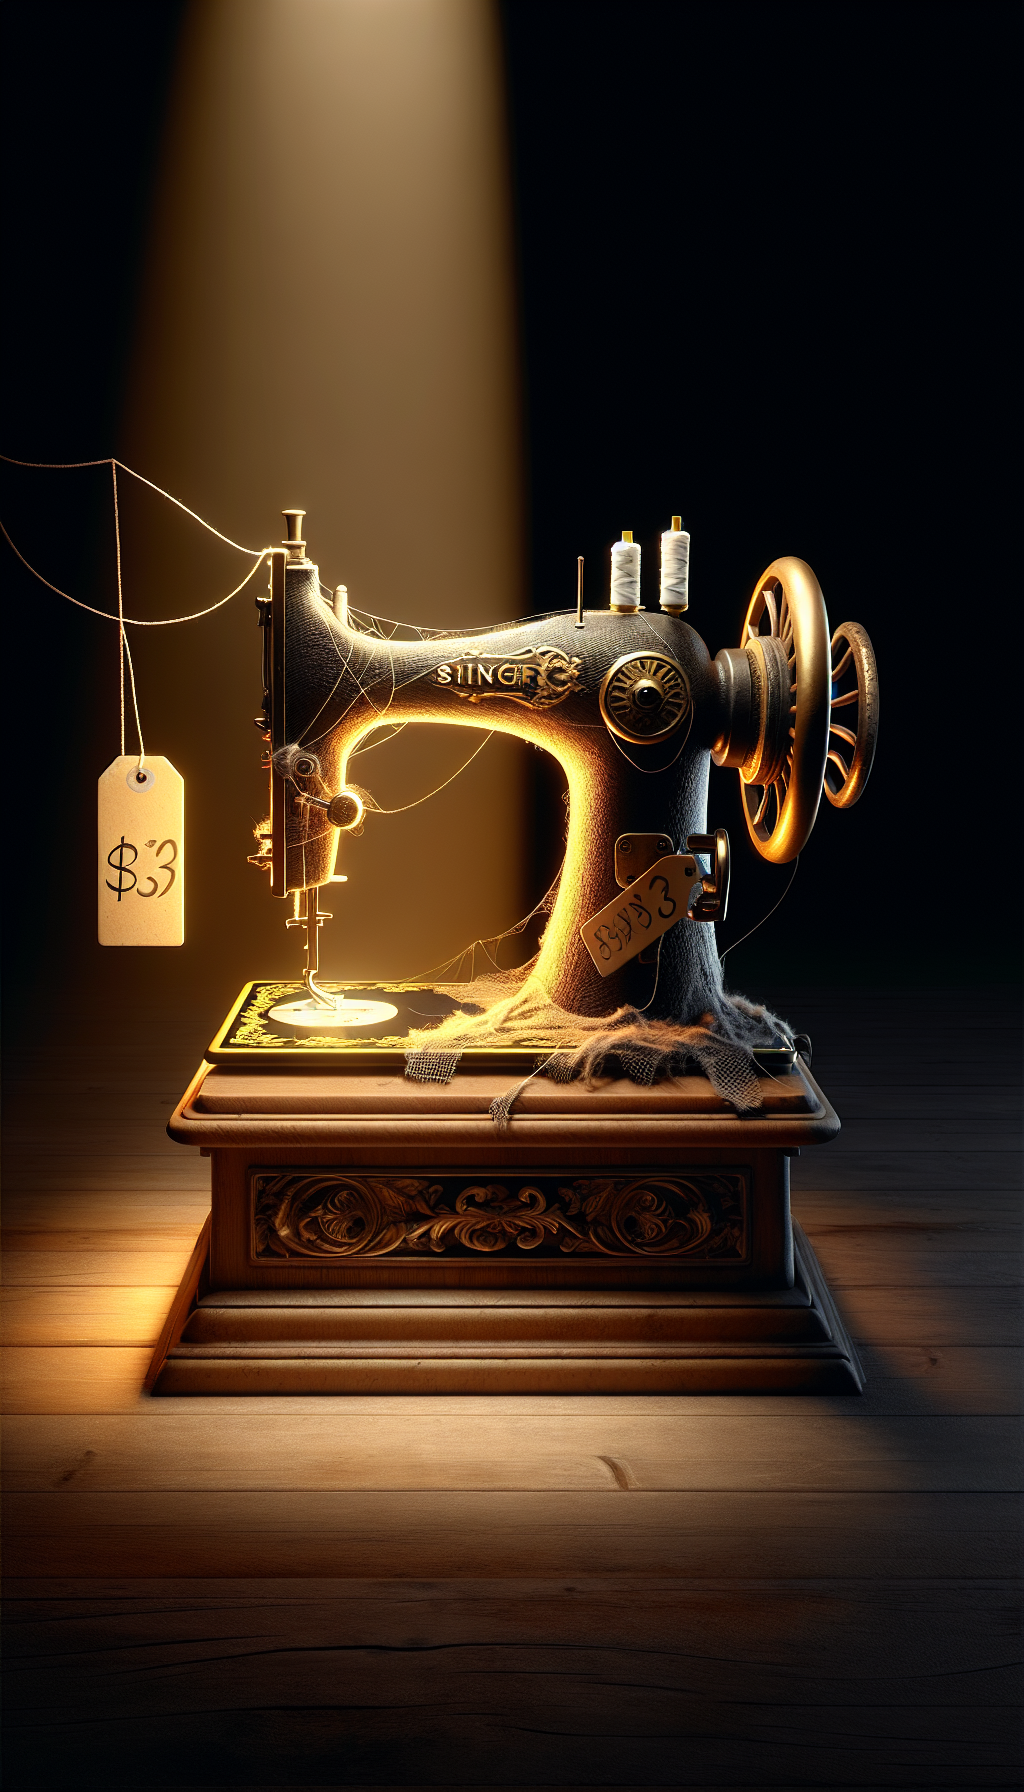 An illustration of an ornate Singer sewing machine on a pedestal, half bathed in golden light symbolizing preservation, while the other half is shadowed and draped with cobwebs, indicating neglect. Below, two contrasting price tags hang, the preserved side with a high value, and the neglected with a reduced figure, visually conveying the preservation condition's impact on the antique’s worth.